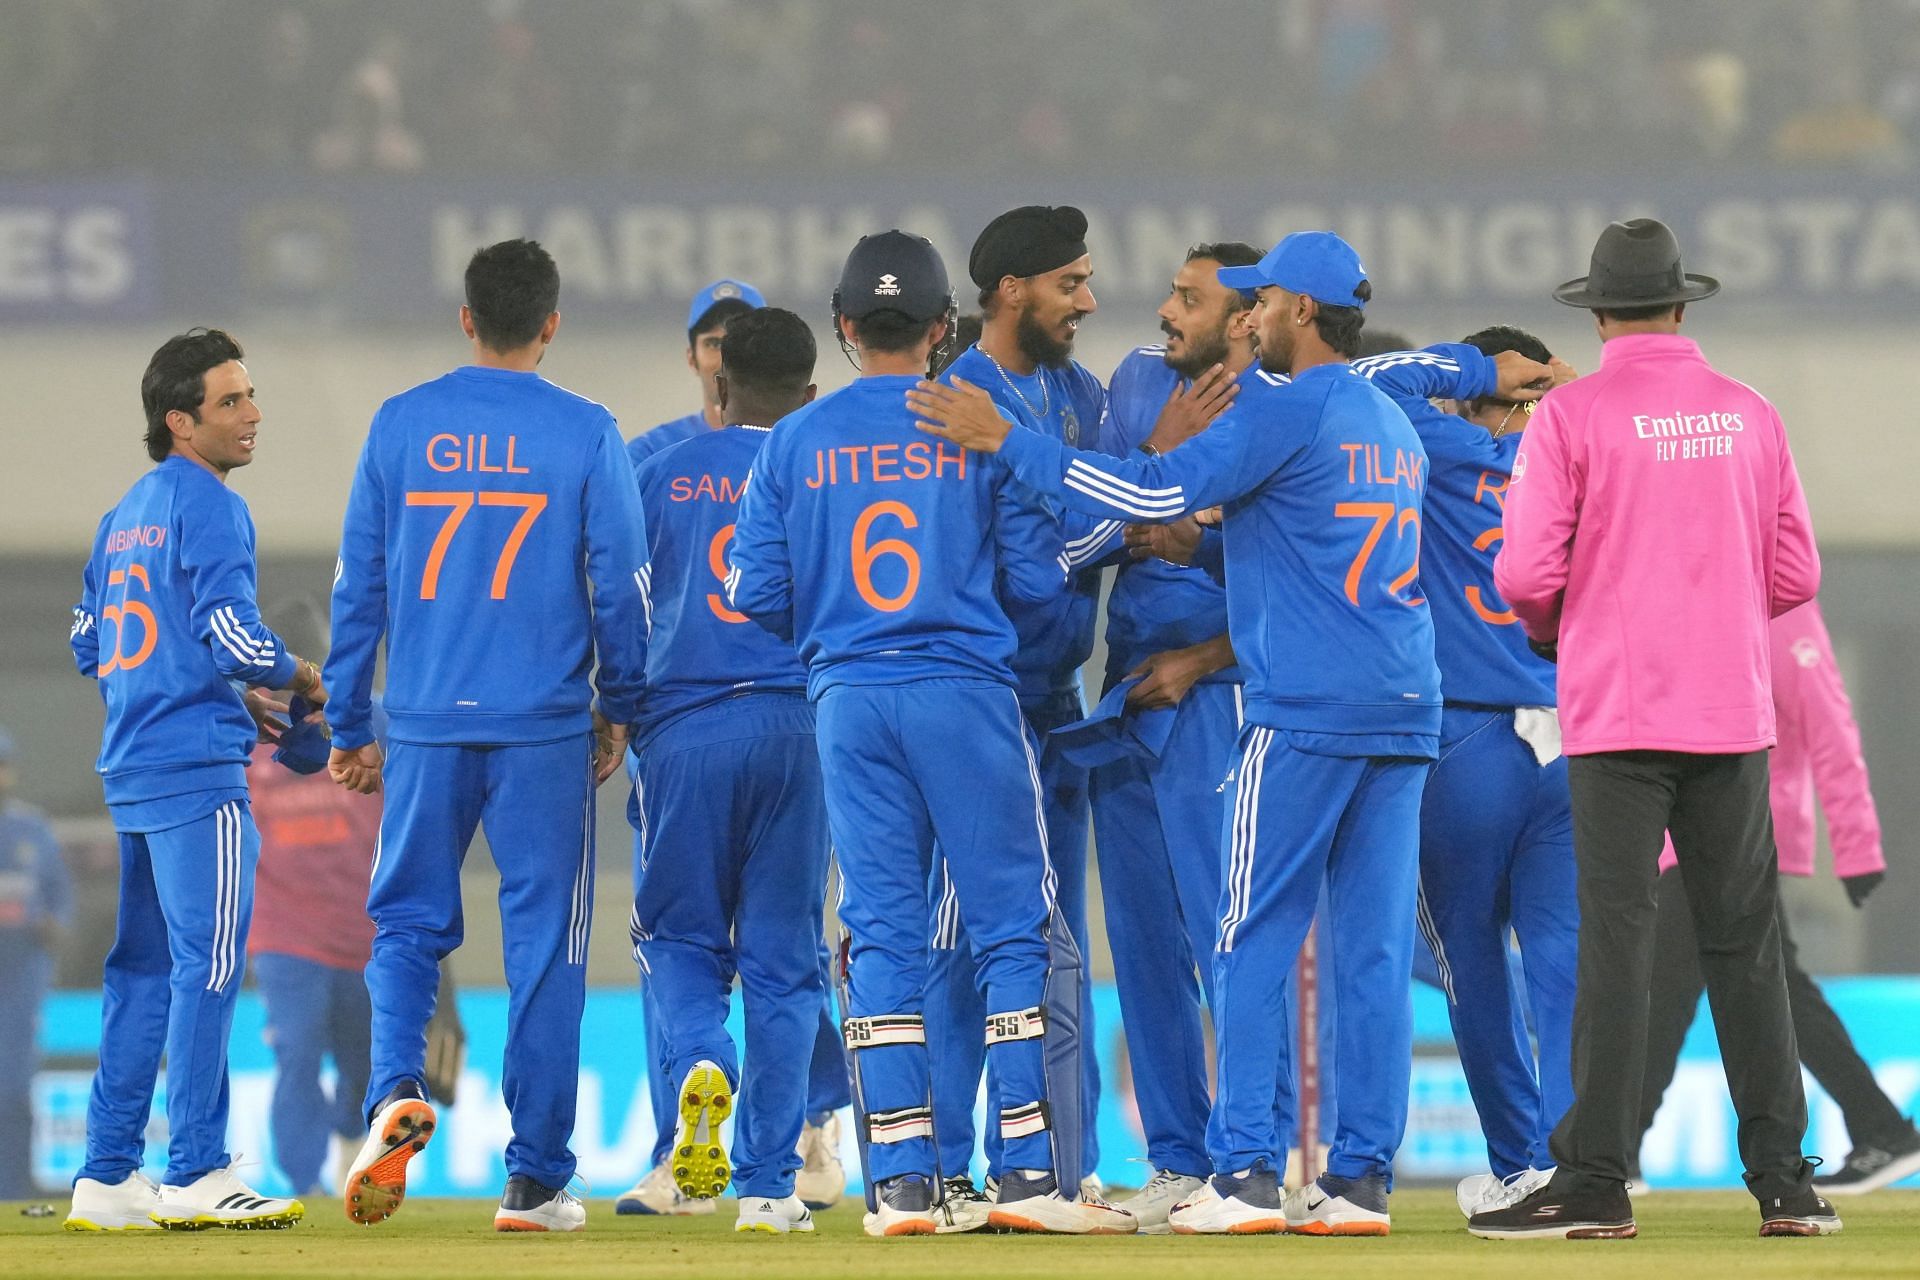 Will India be able to take an unassailable 2-0 lead to win the series?